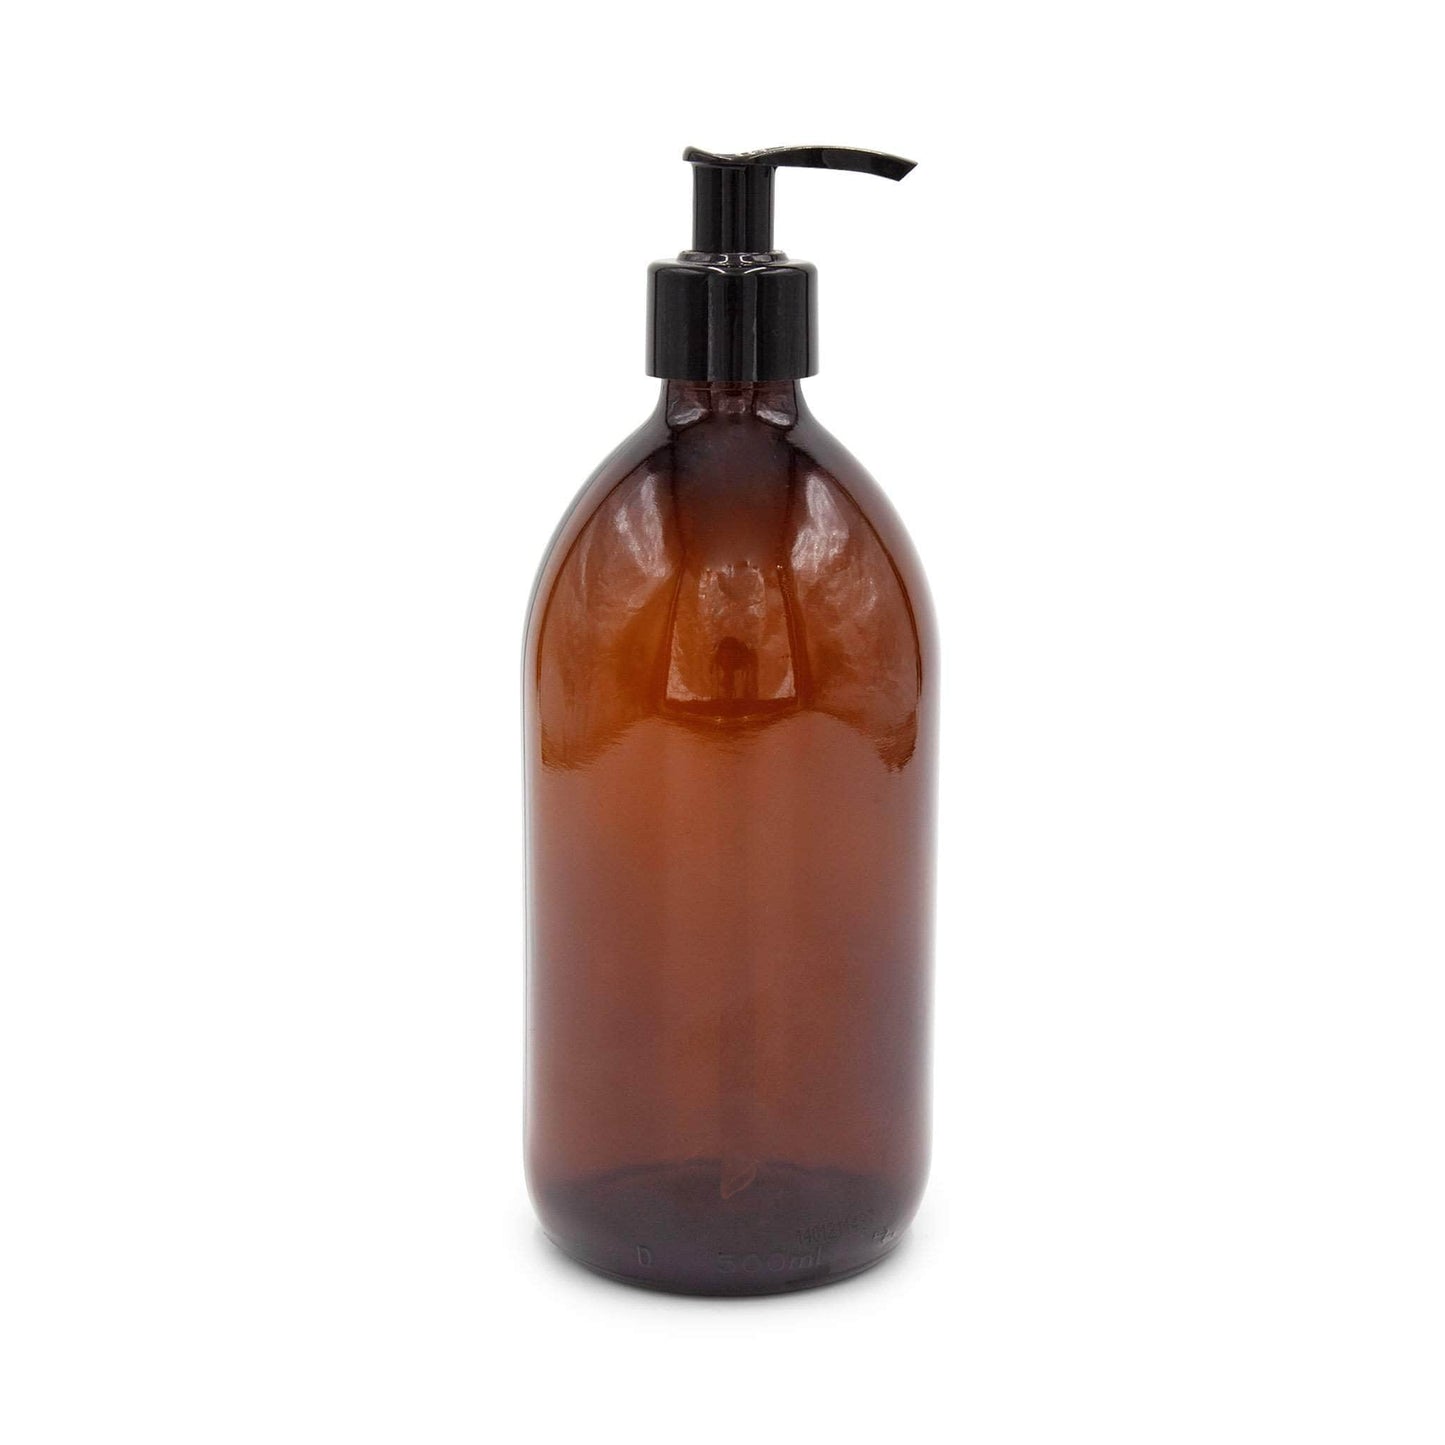 Faerly Bottles Lotion Pump 500ml Amber Glass Sirop Bottle - with Trigger Spray or Lotion Pump